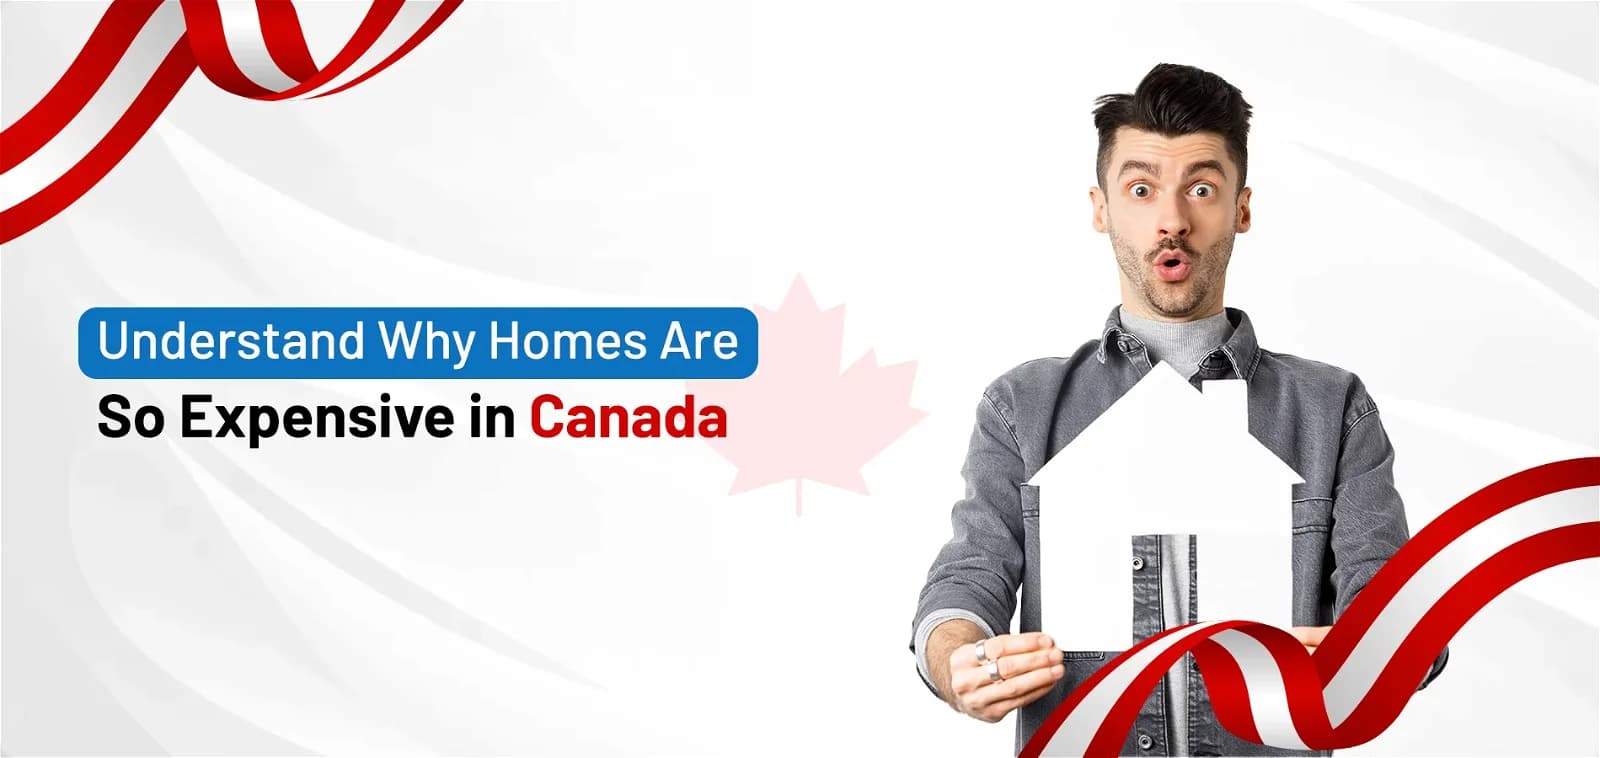 The Great White North’s Housing Squeeze: Why Homes in Canada Cost More?